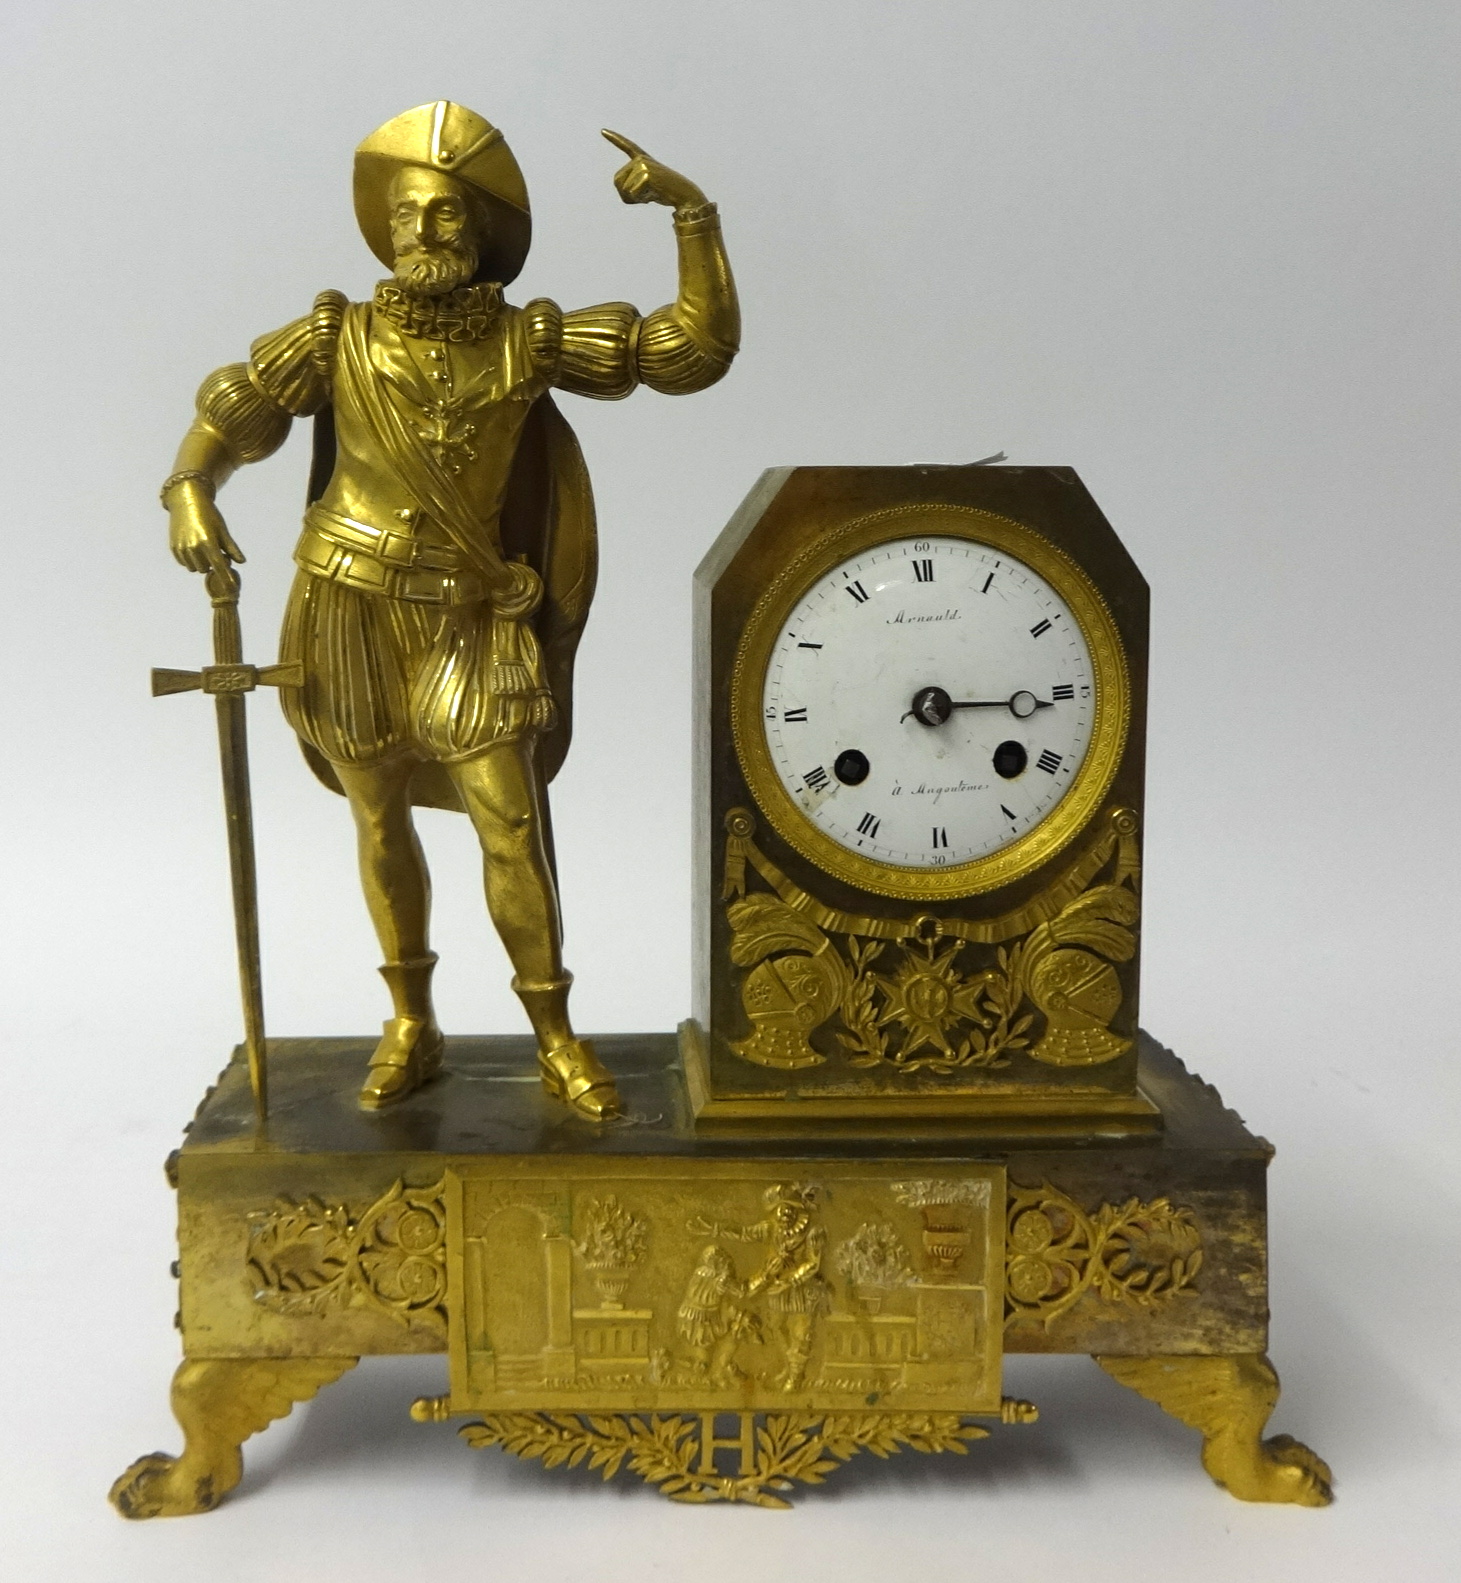 A 19th century French Empire Gilt Bronze Figural Mantle Clock, the movement signed 'A. D Mougin',